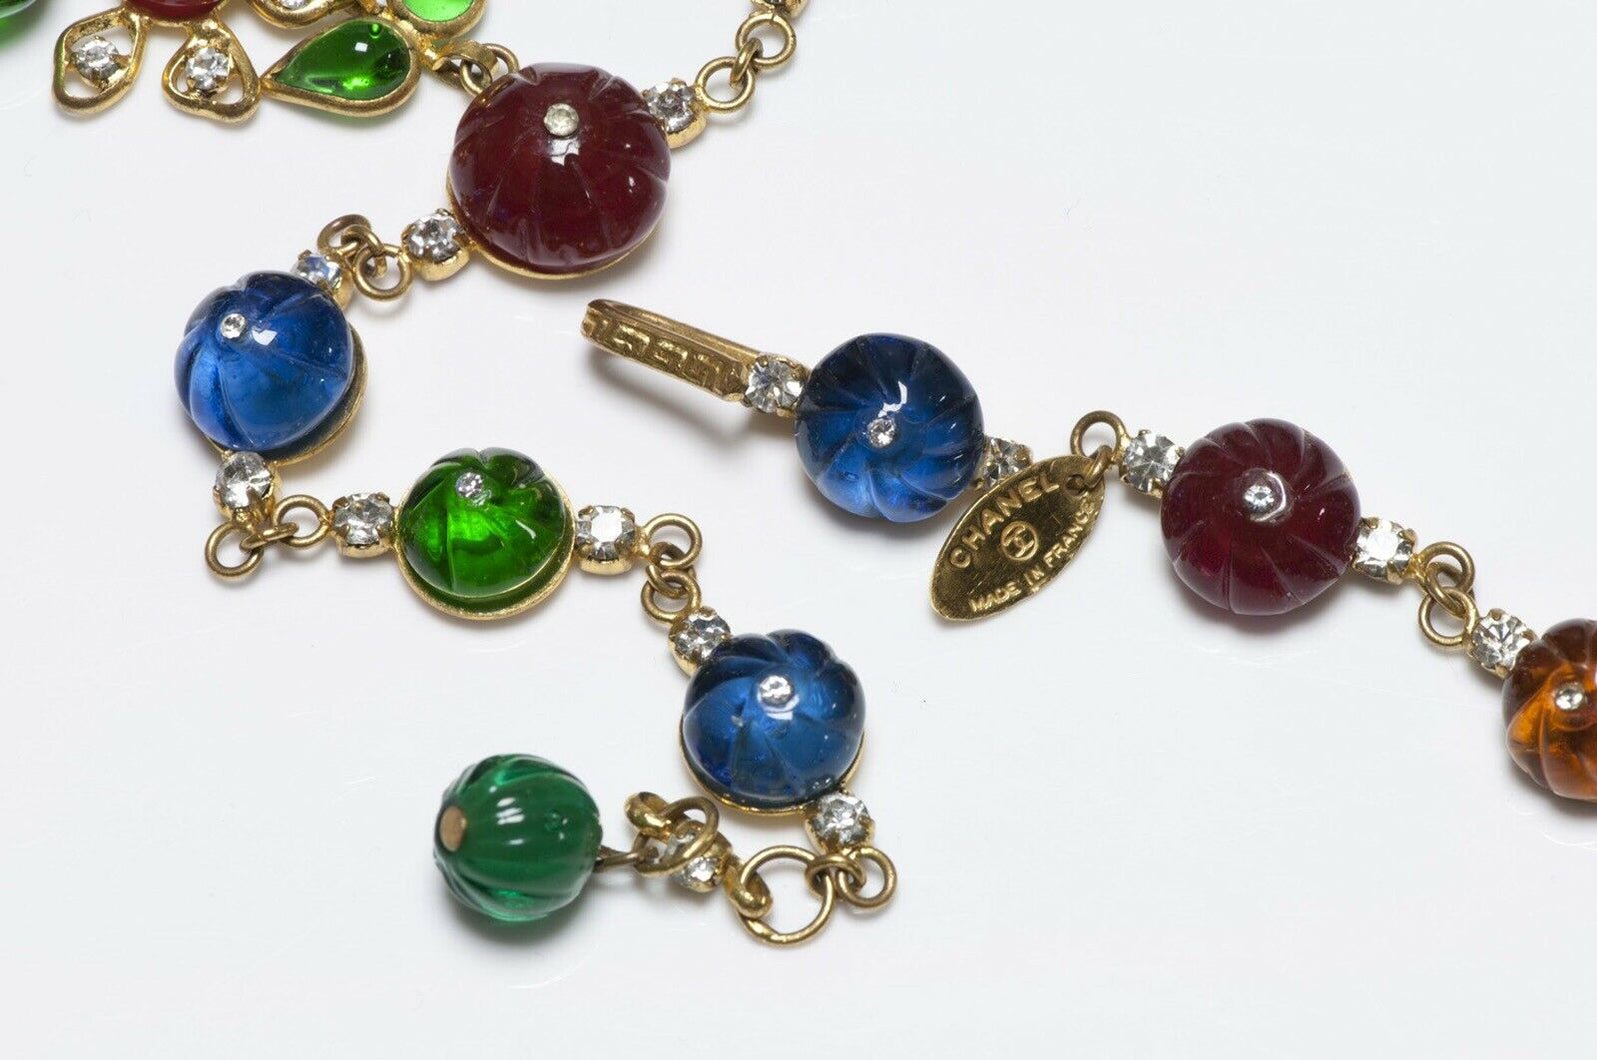 CHANEL 1990’s Couture Gripoix Camellia Green Red Blue Glass Necklace